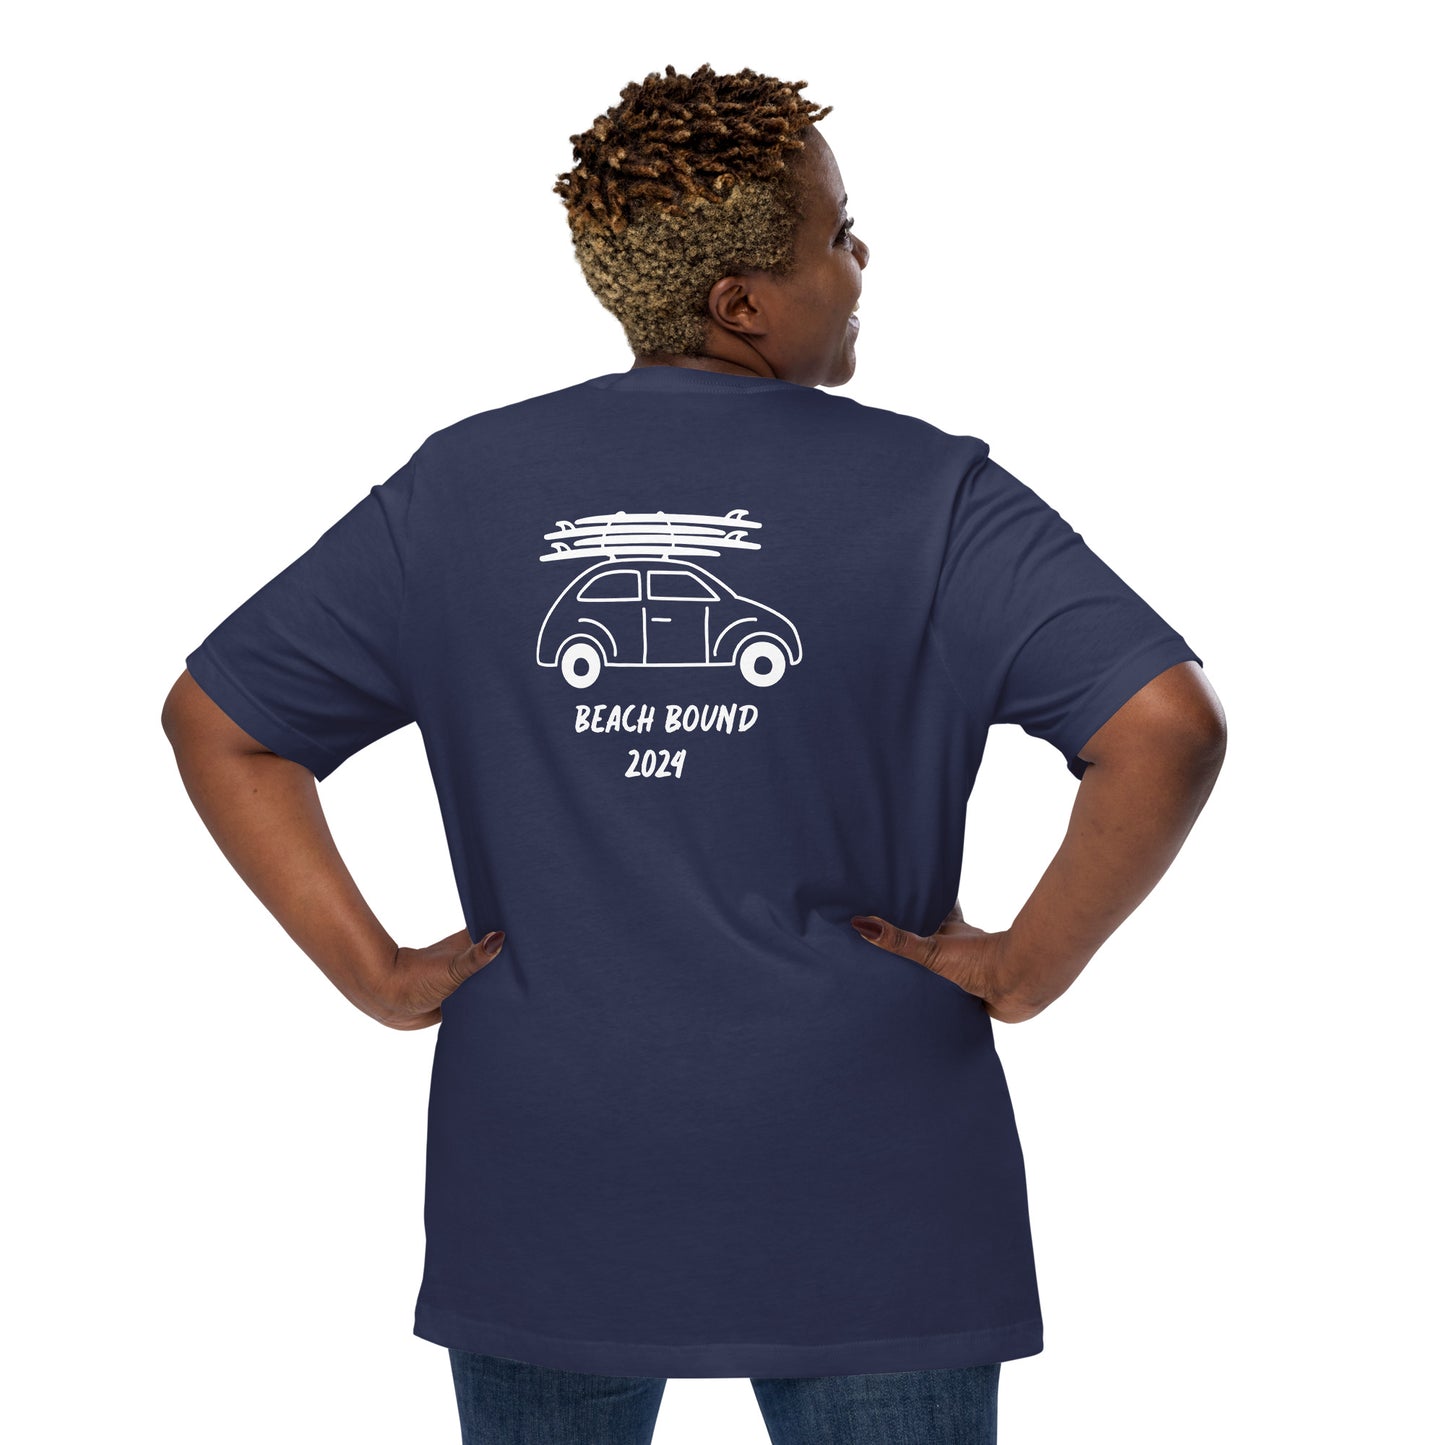 Beach Bound this Summer in the Adult Unisex T-Shirt